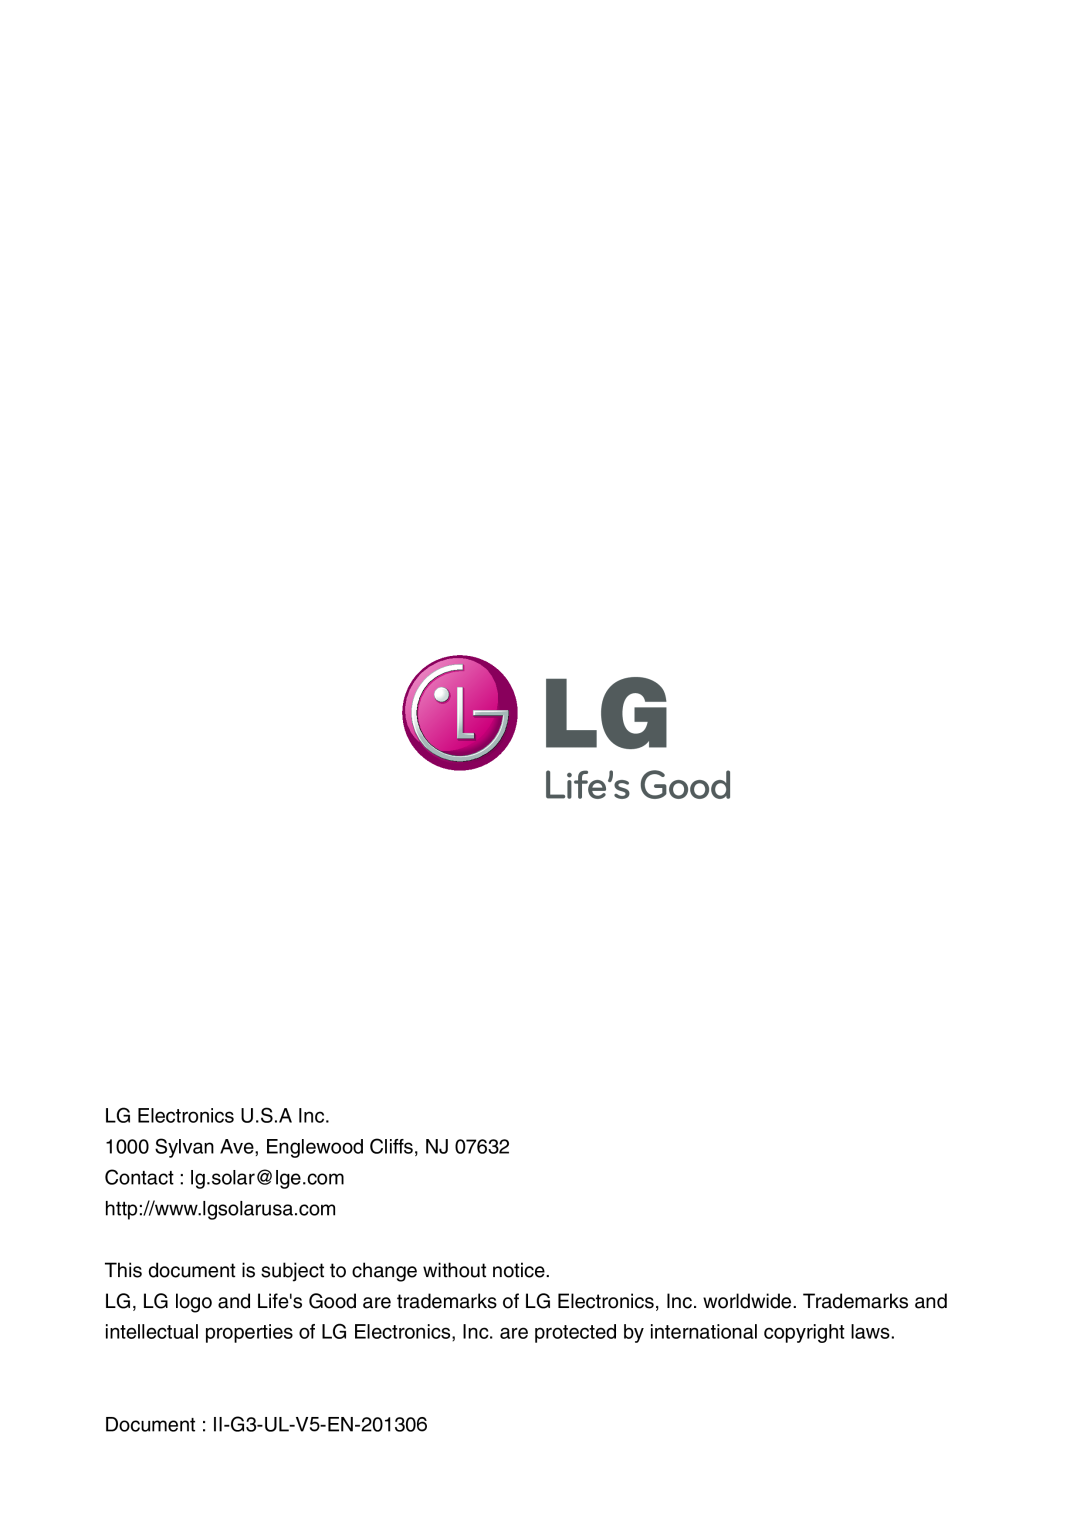 LG Electronics K)-G3, LGXXXS1C(W LG Electronics U.S.A Inc, This document is subject to change without notice 